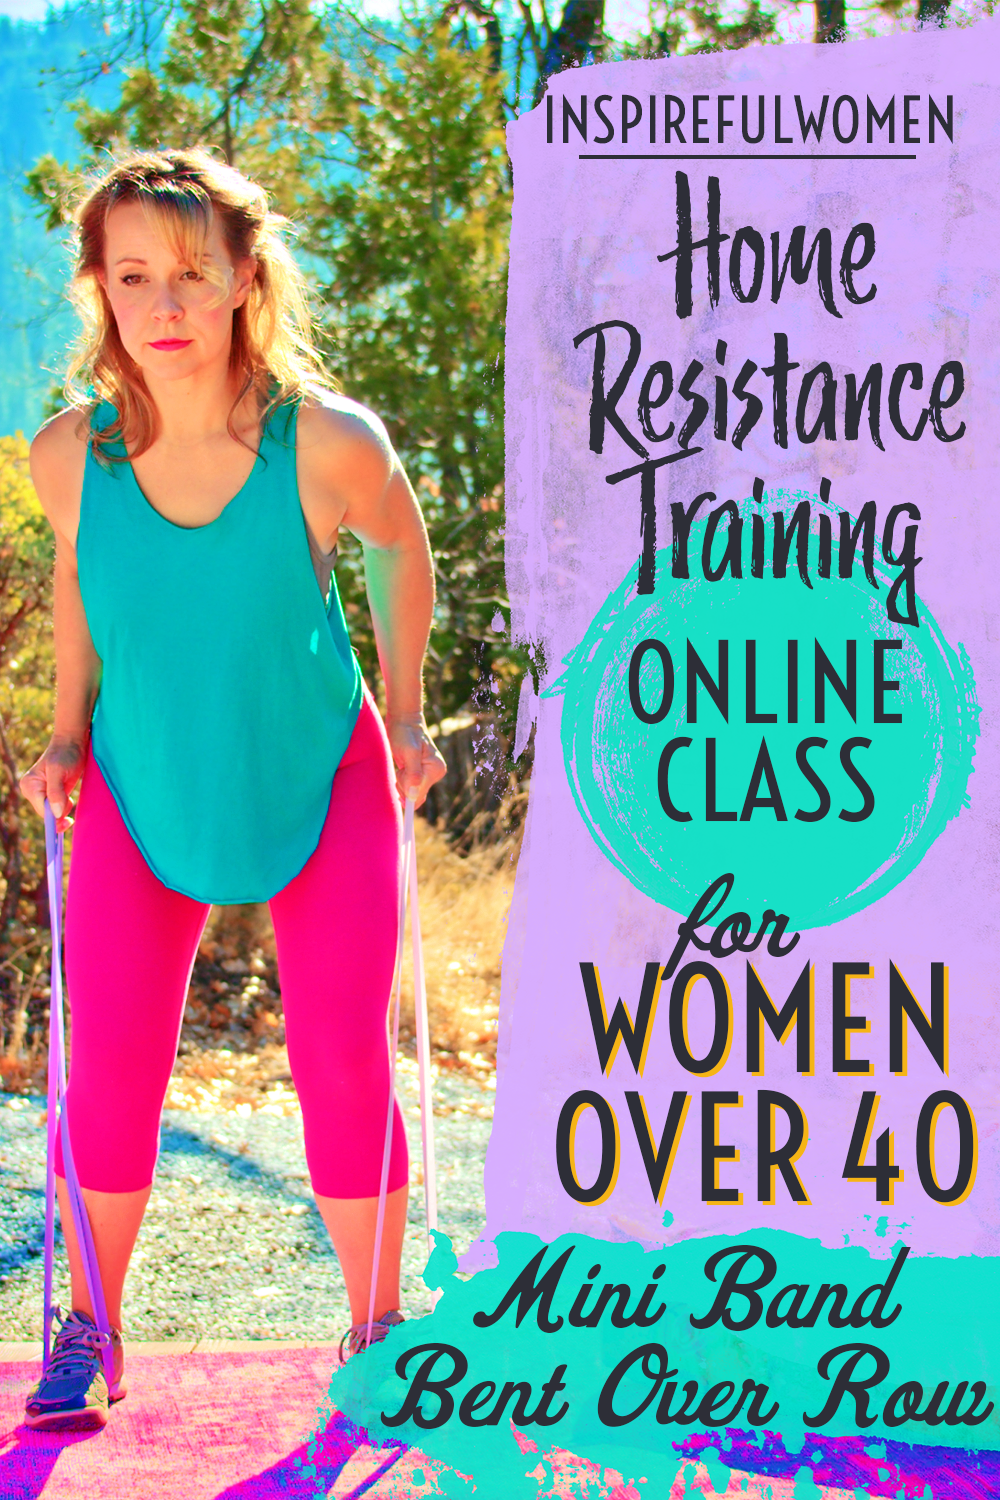 two-arm-row-mini-band-bent-over-resistance-online-class-women-40-above